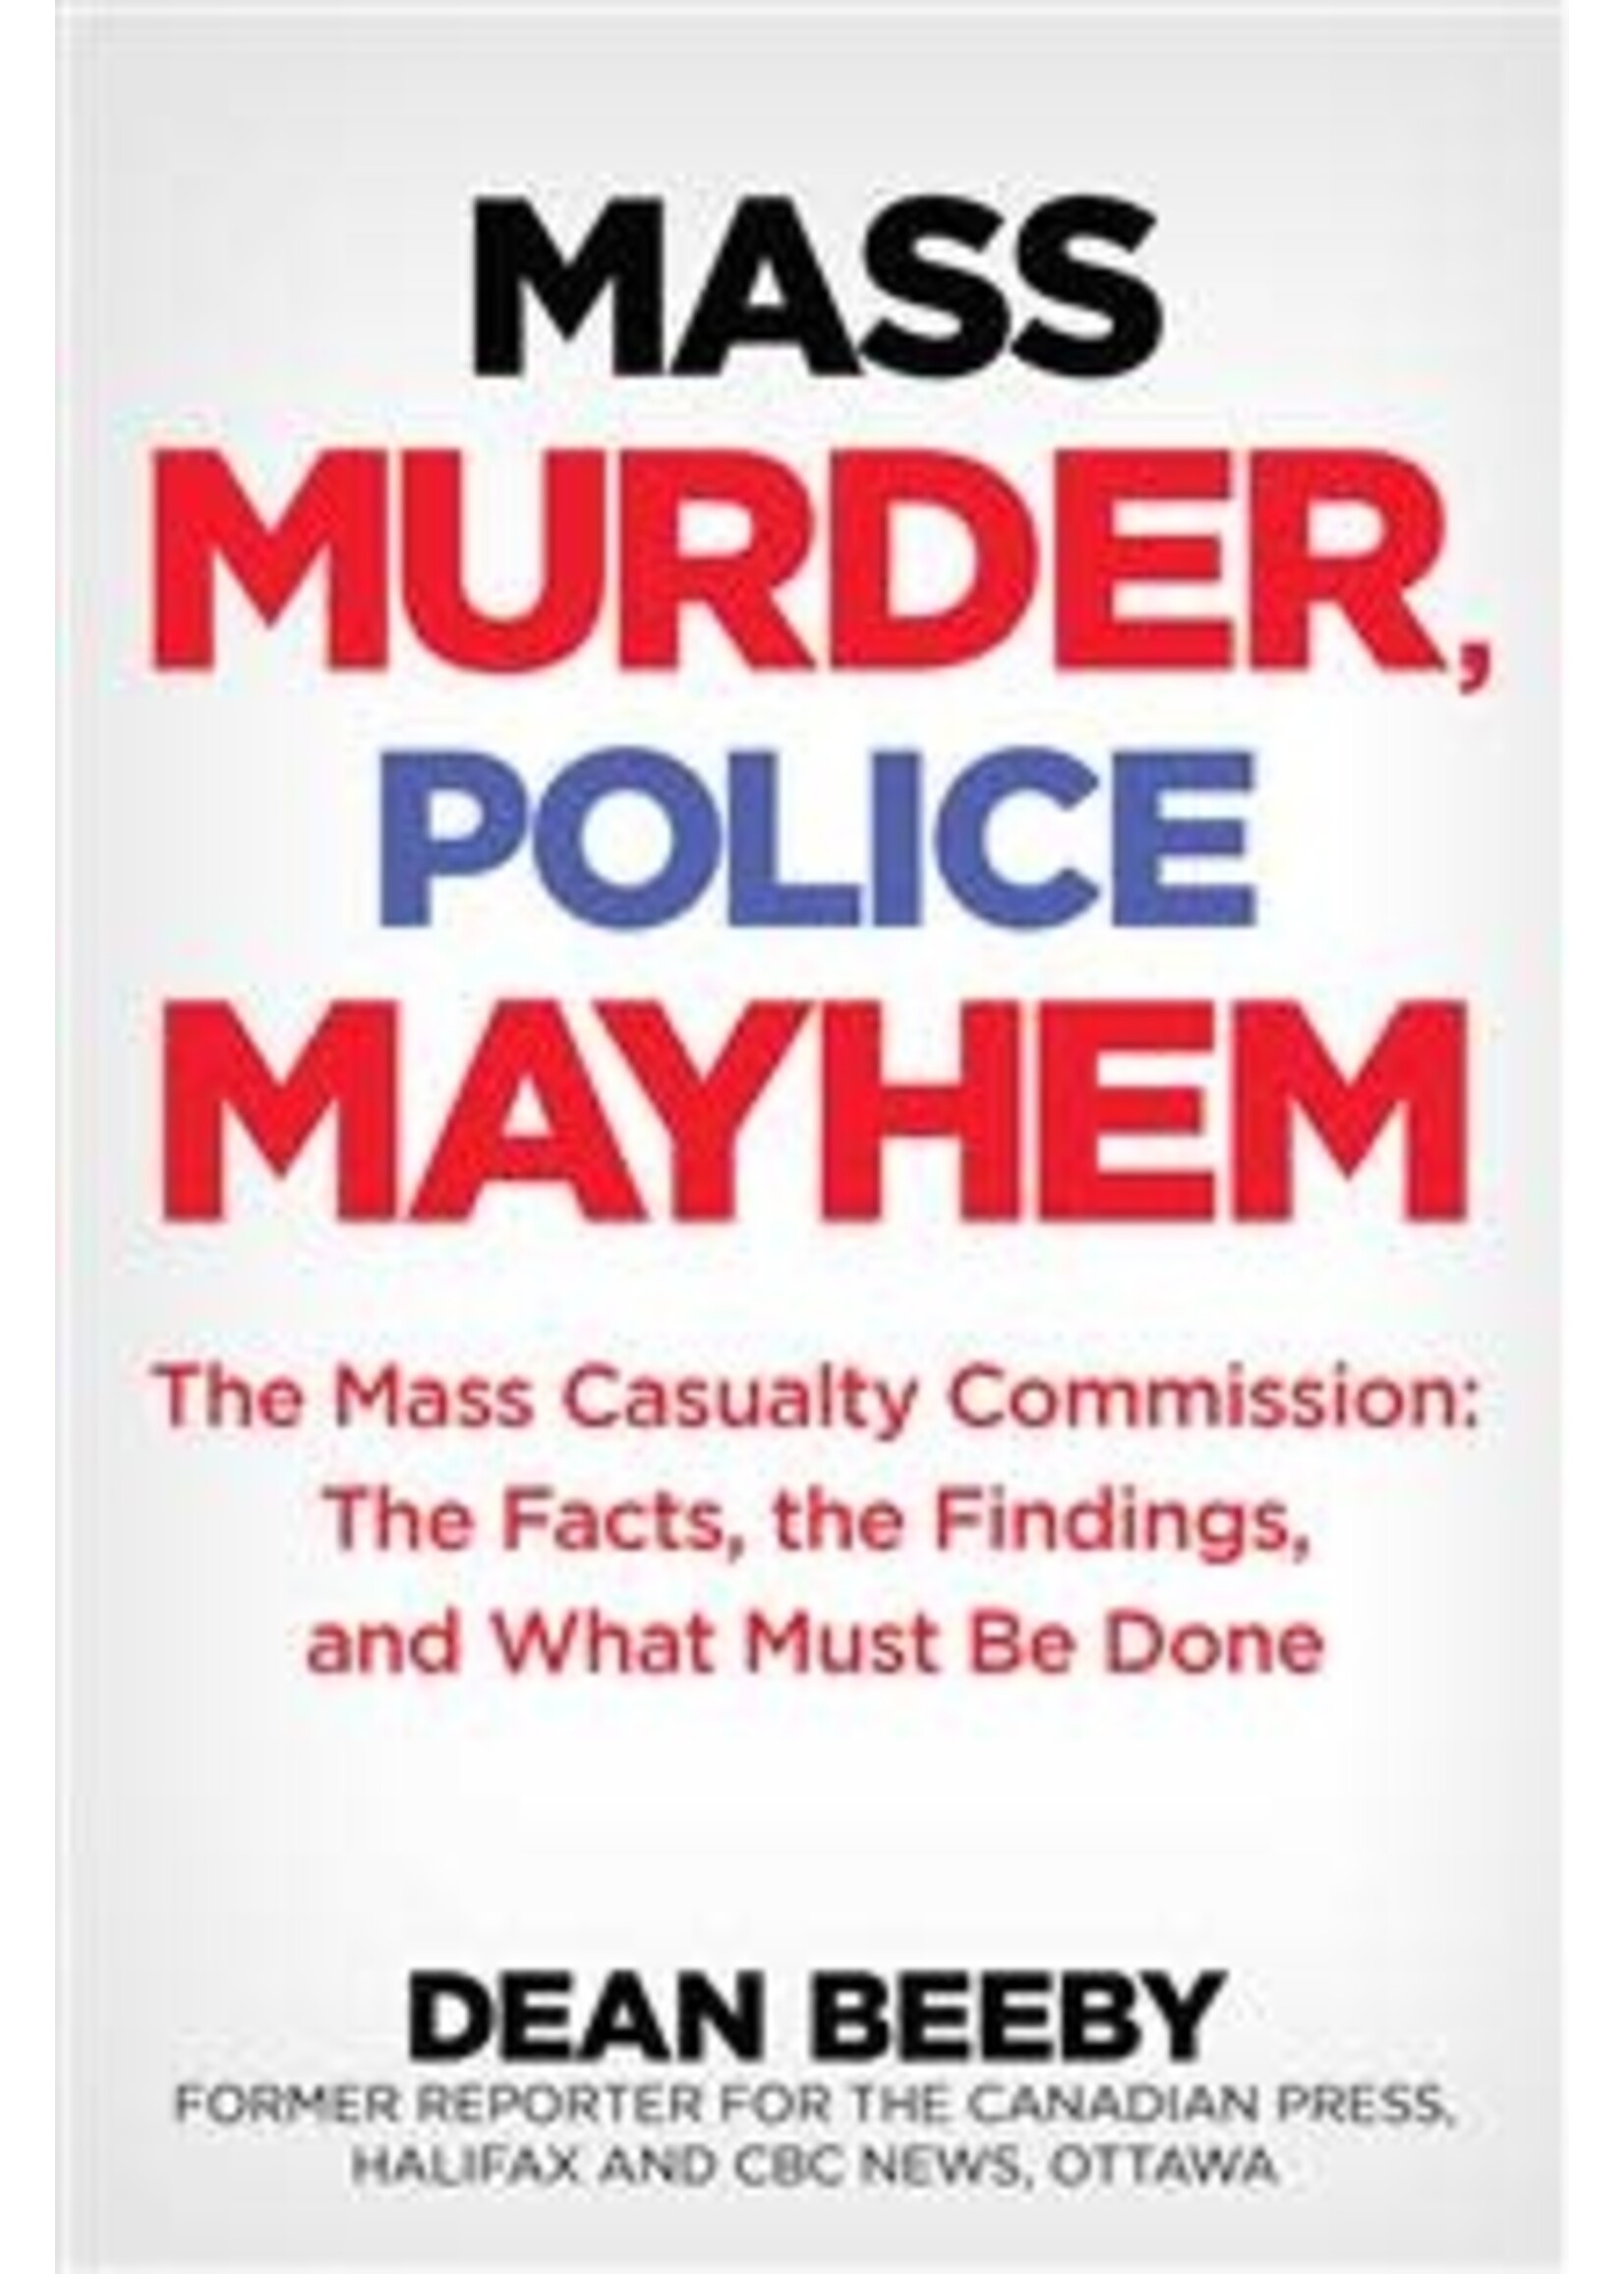 Mass Murder, Police Mayhem: The Mass Casualty Commission - The Facts, The Findings, and What Must Be Done by Dean Beeby